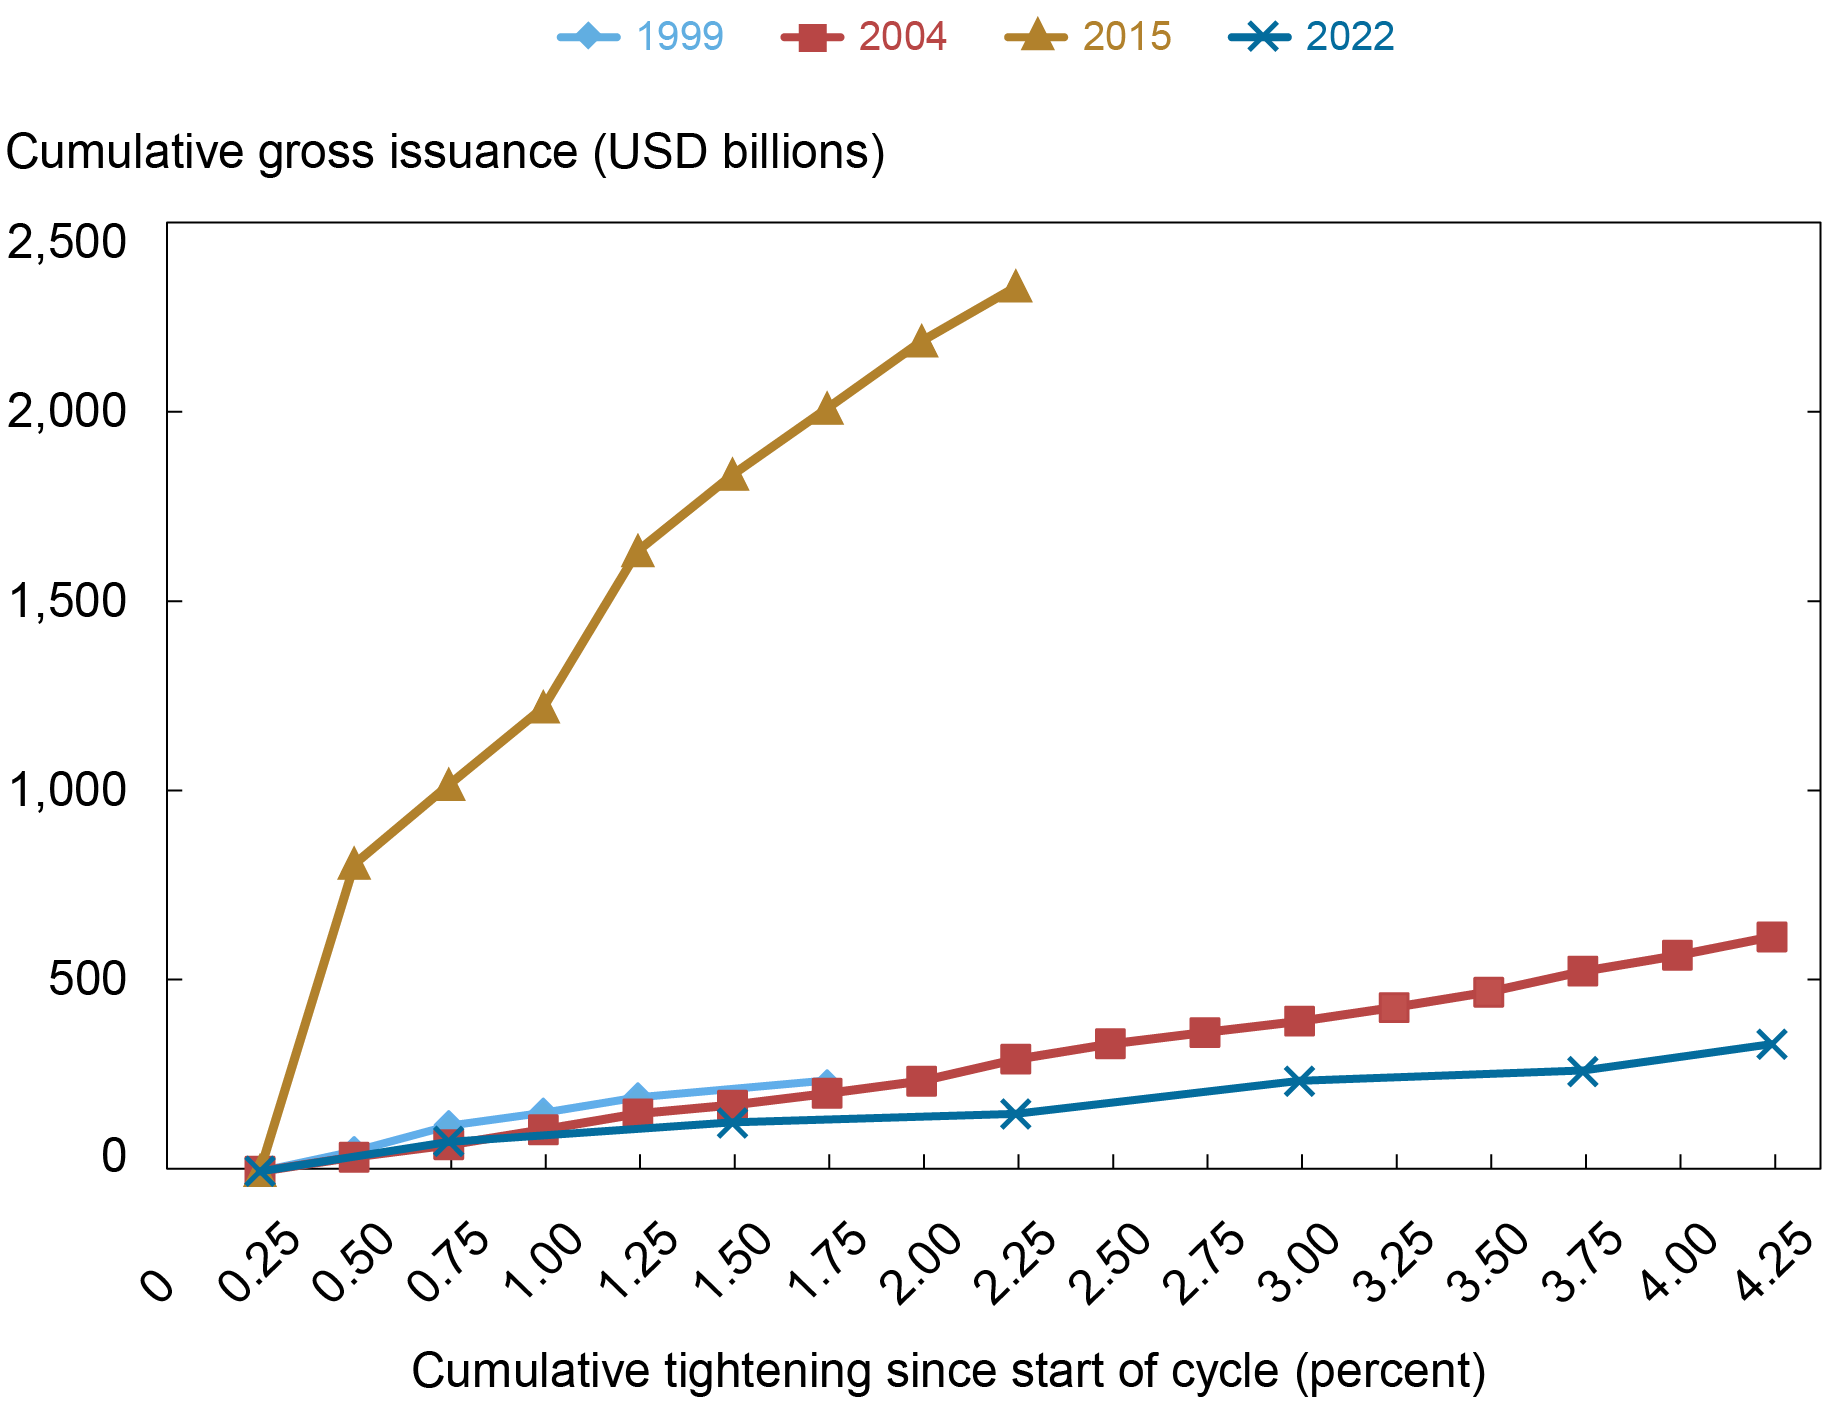 Liberty Street Economics chart showing the cumulative gross issuance has been subdued in the 2022 tightening cycle as compared to the previous three tightening cycles in 1999, 2004, and 2015.